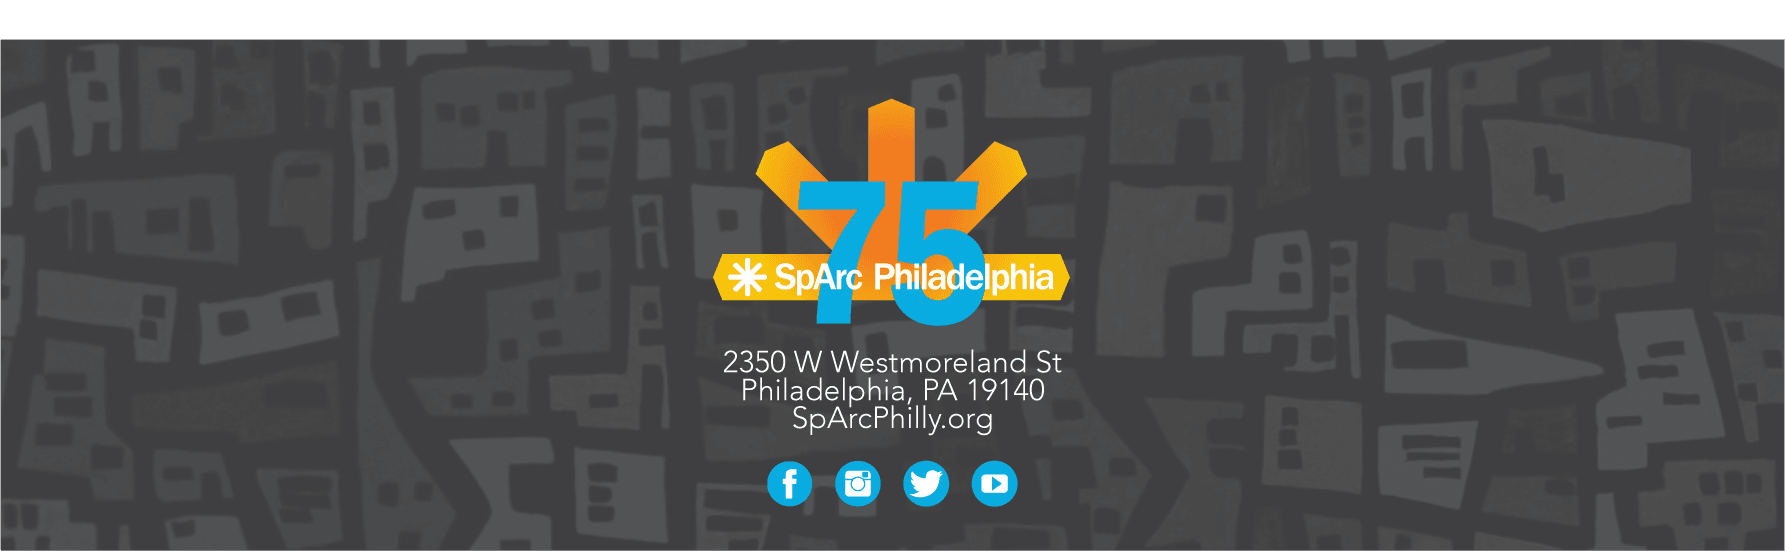 SpArc Philadelphia logo with address and link to Facebook page